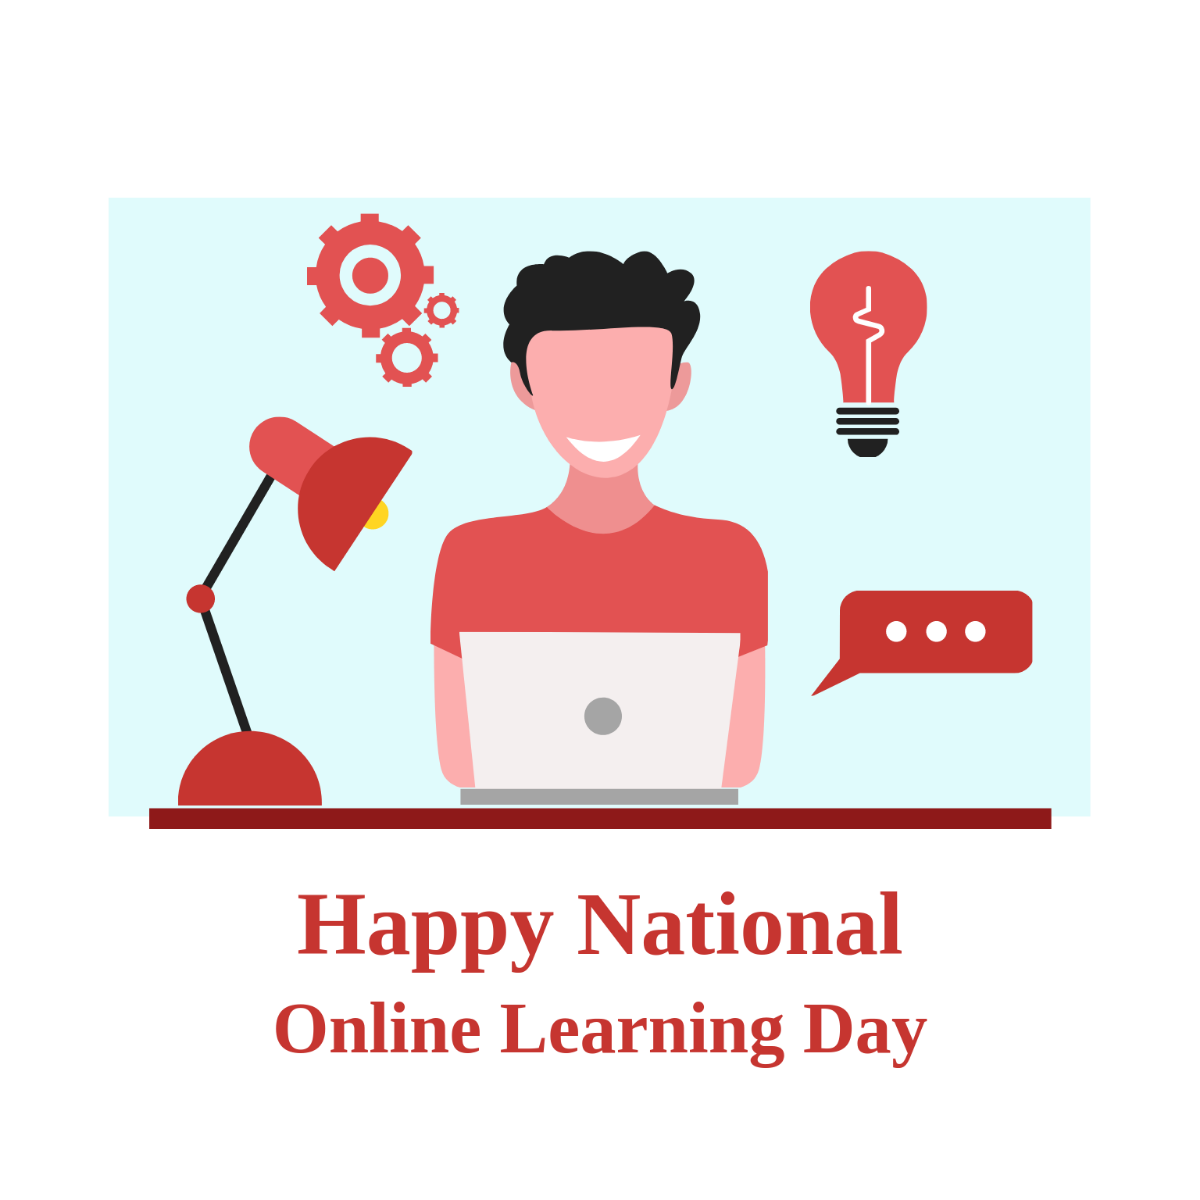 Happy National Online Learning Day Vector Template